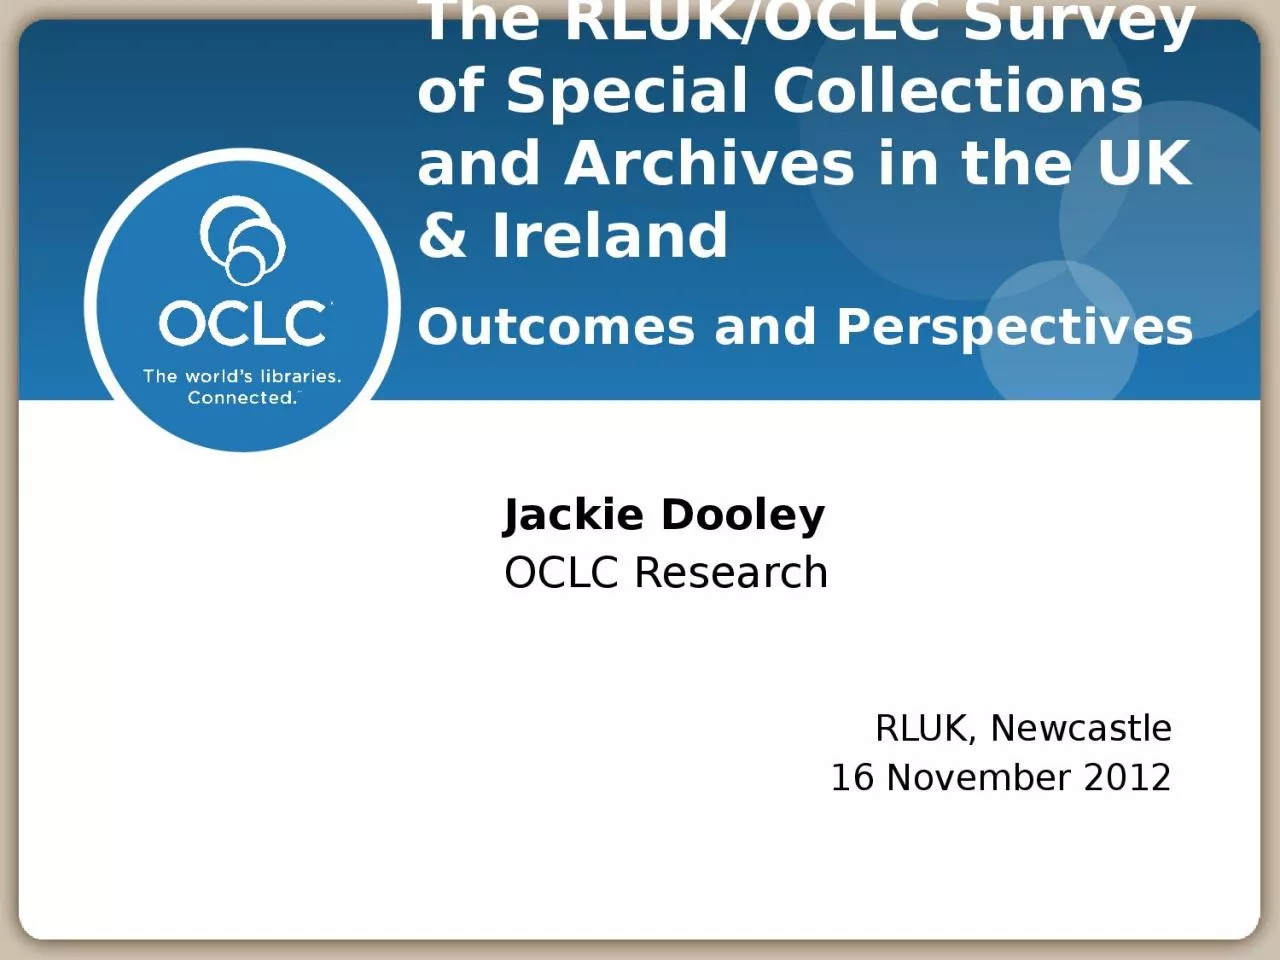 The RLUK/OCLC Survey of Special Collections and Archives in the UK & Ireland